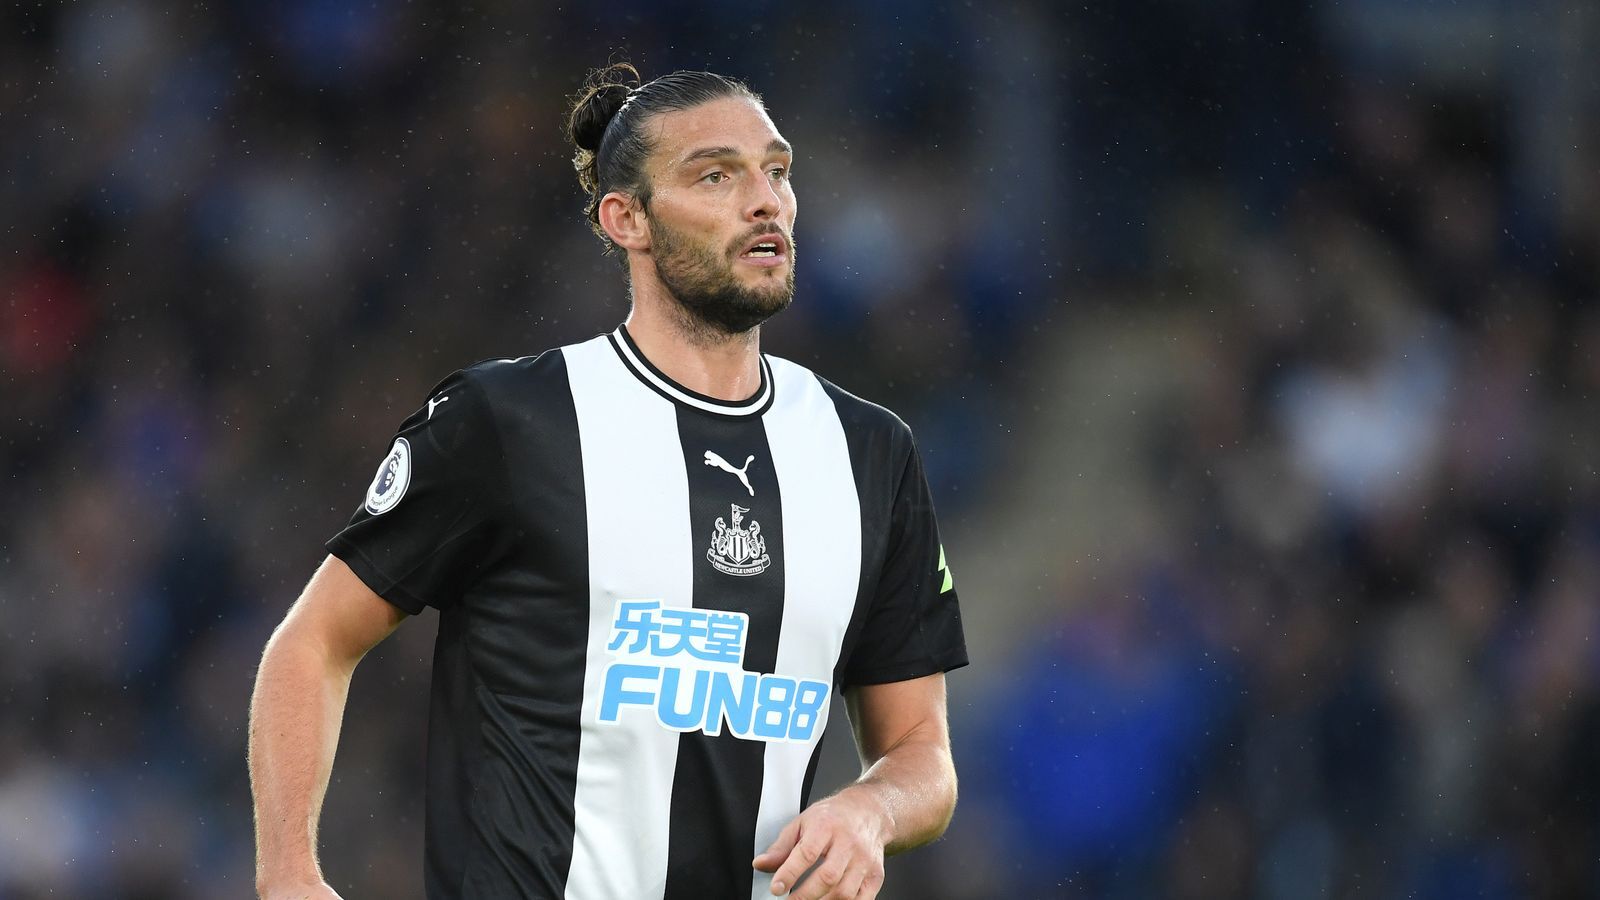 Striker Andy Carroll signed a new contract with Newcastle United